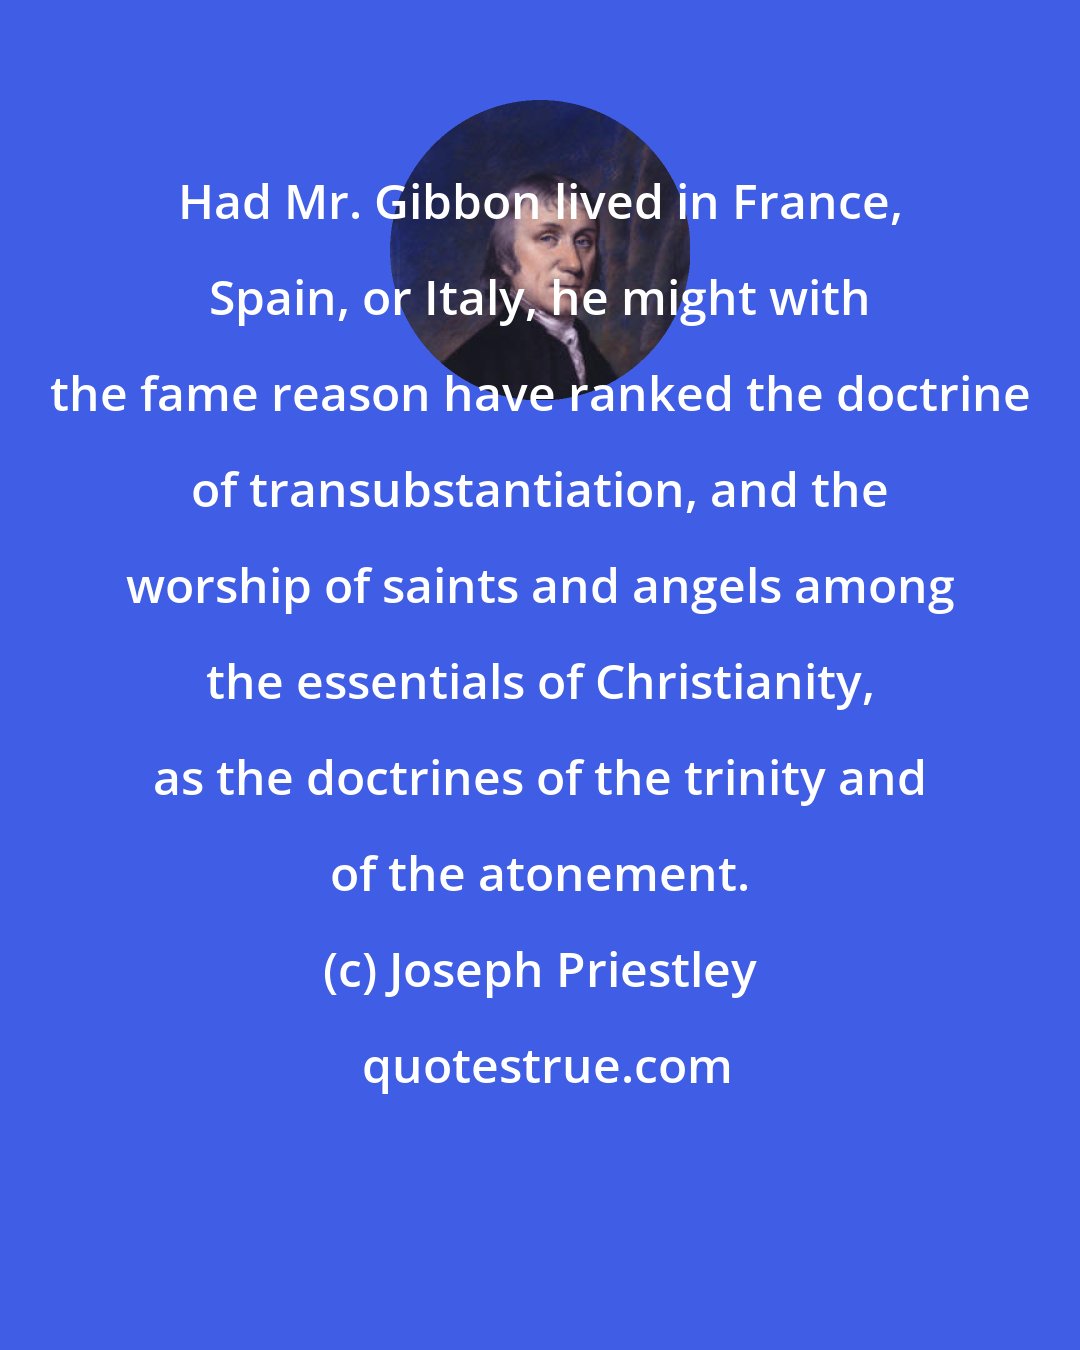 Joseph Priestley: Had Mr. Gibbon lived in France, Spain, or Italy, he might with the fame reason have ranked the doctrine of transubstantiation, and the worship of saints and angels among the essentials of Christianity, as the doctrines of the trinity and of the atonement.